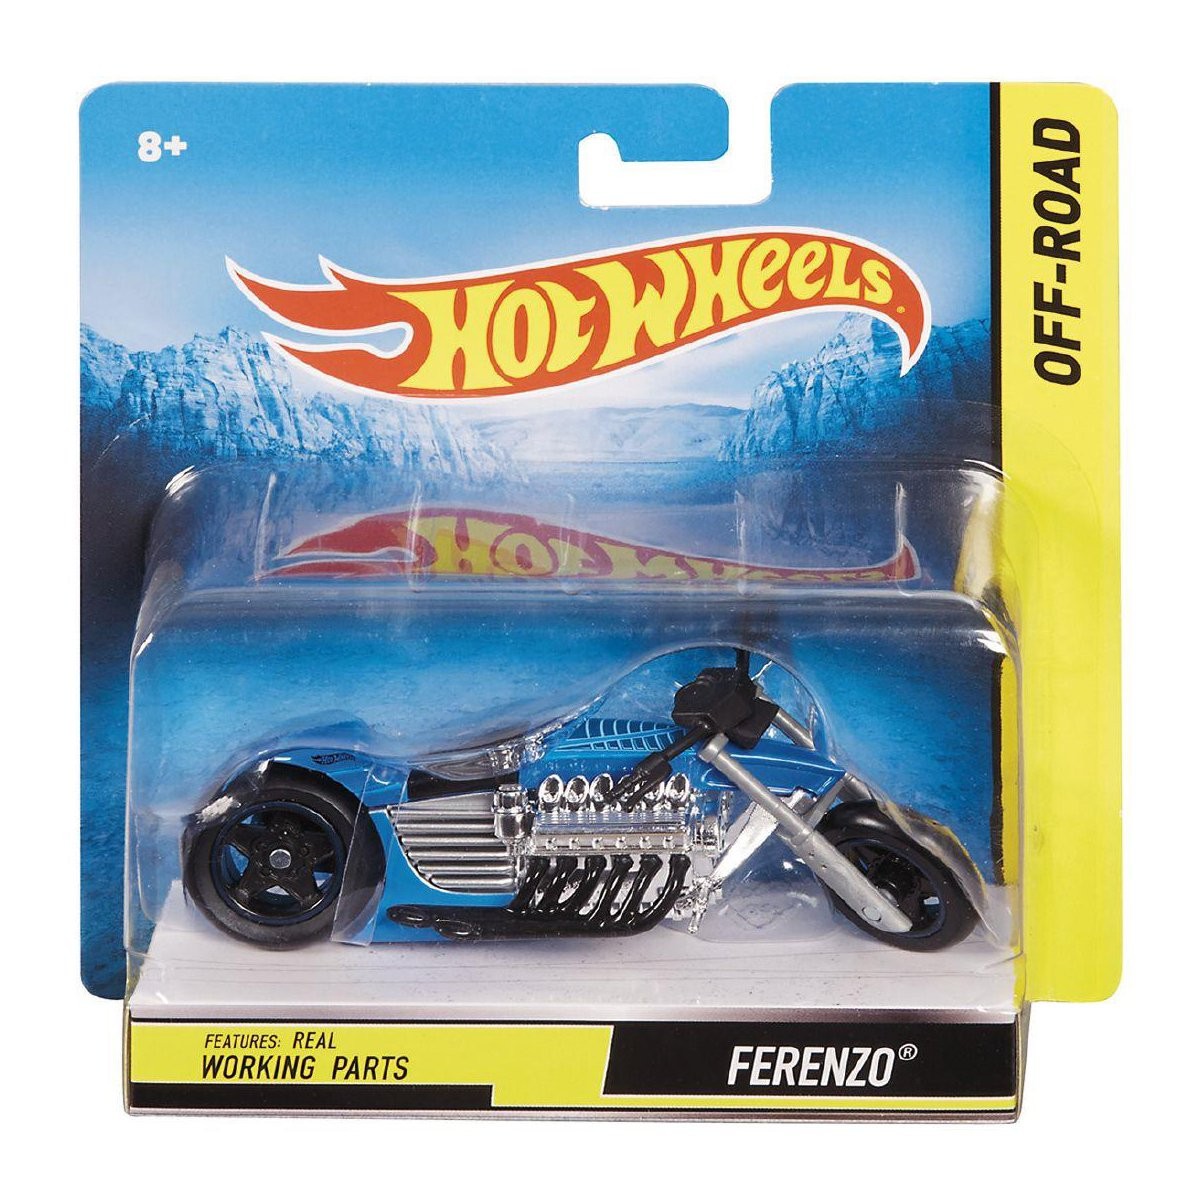 Hot Wheels 1:18 Street Power Motorcycle  Vehicles for Kids age 8Y+, Assorted